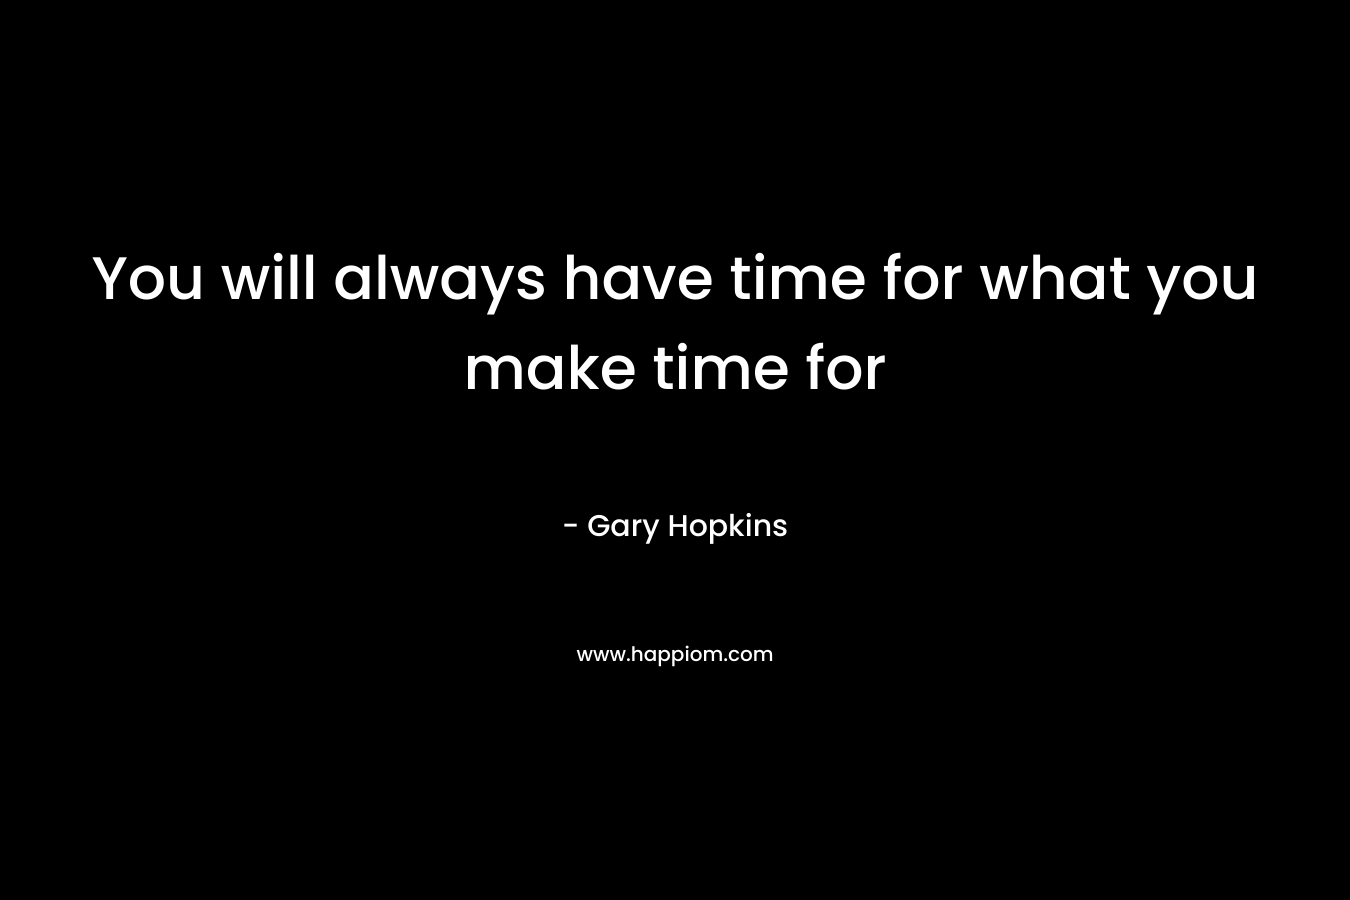 You will always have time for what you make time for